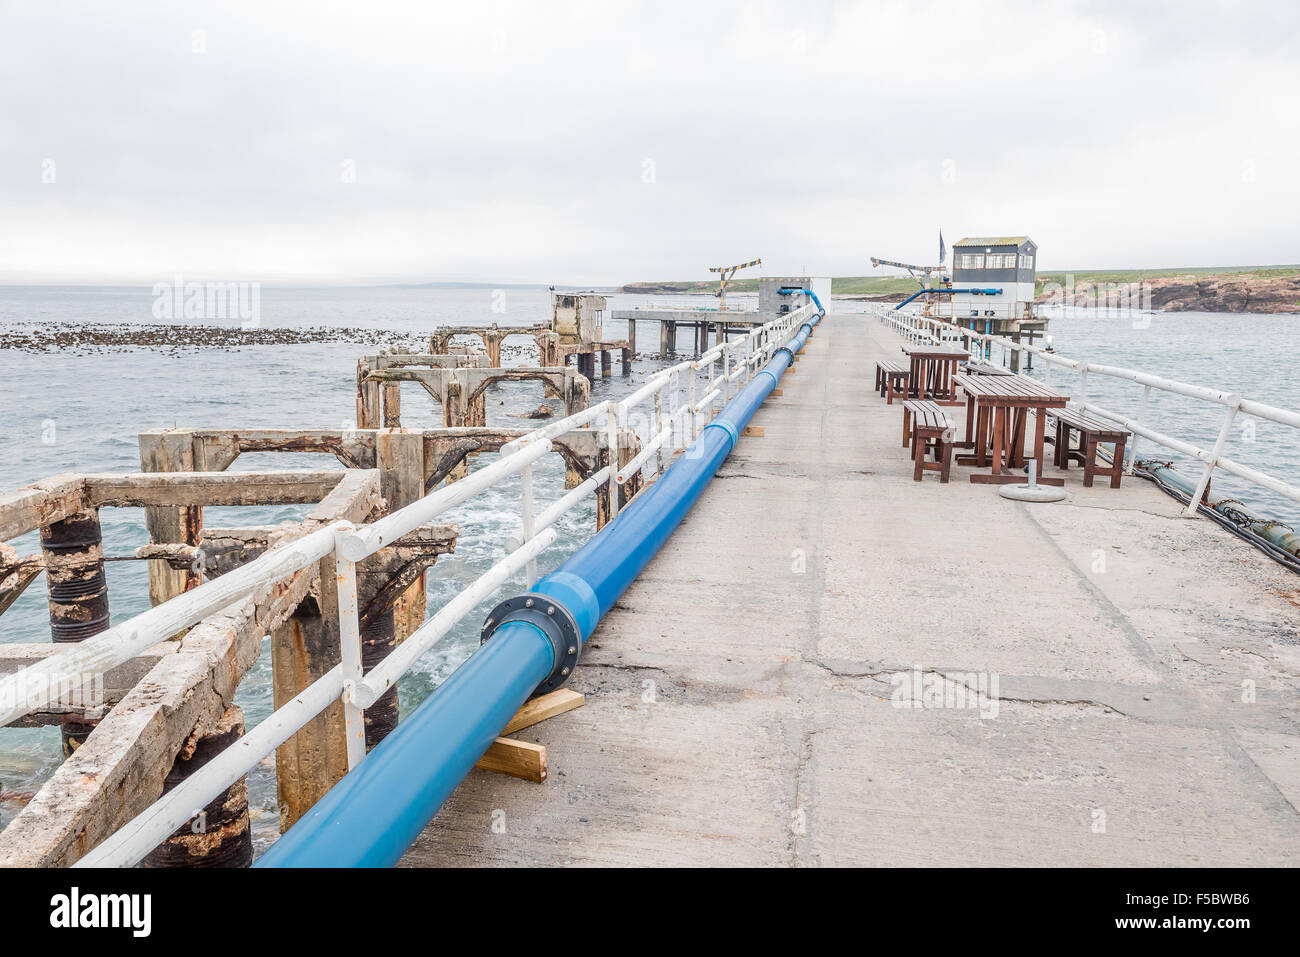 DOORNBAAI, SOUTH AFRICA, AUGUST 12, 2015: The old and new piers at the harbor at Doornbaai (Thorn Bay) on the Atlantic coast of Stock Photo